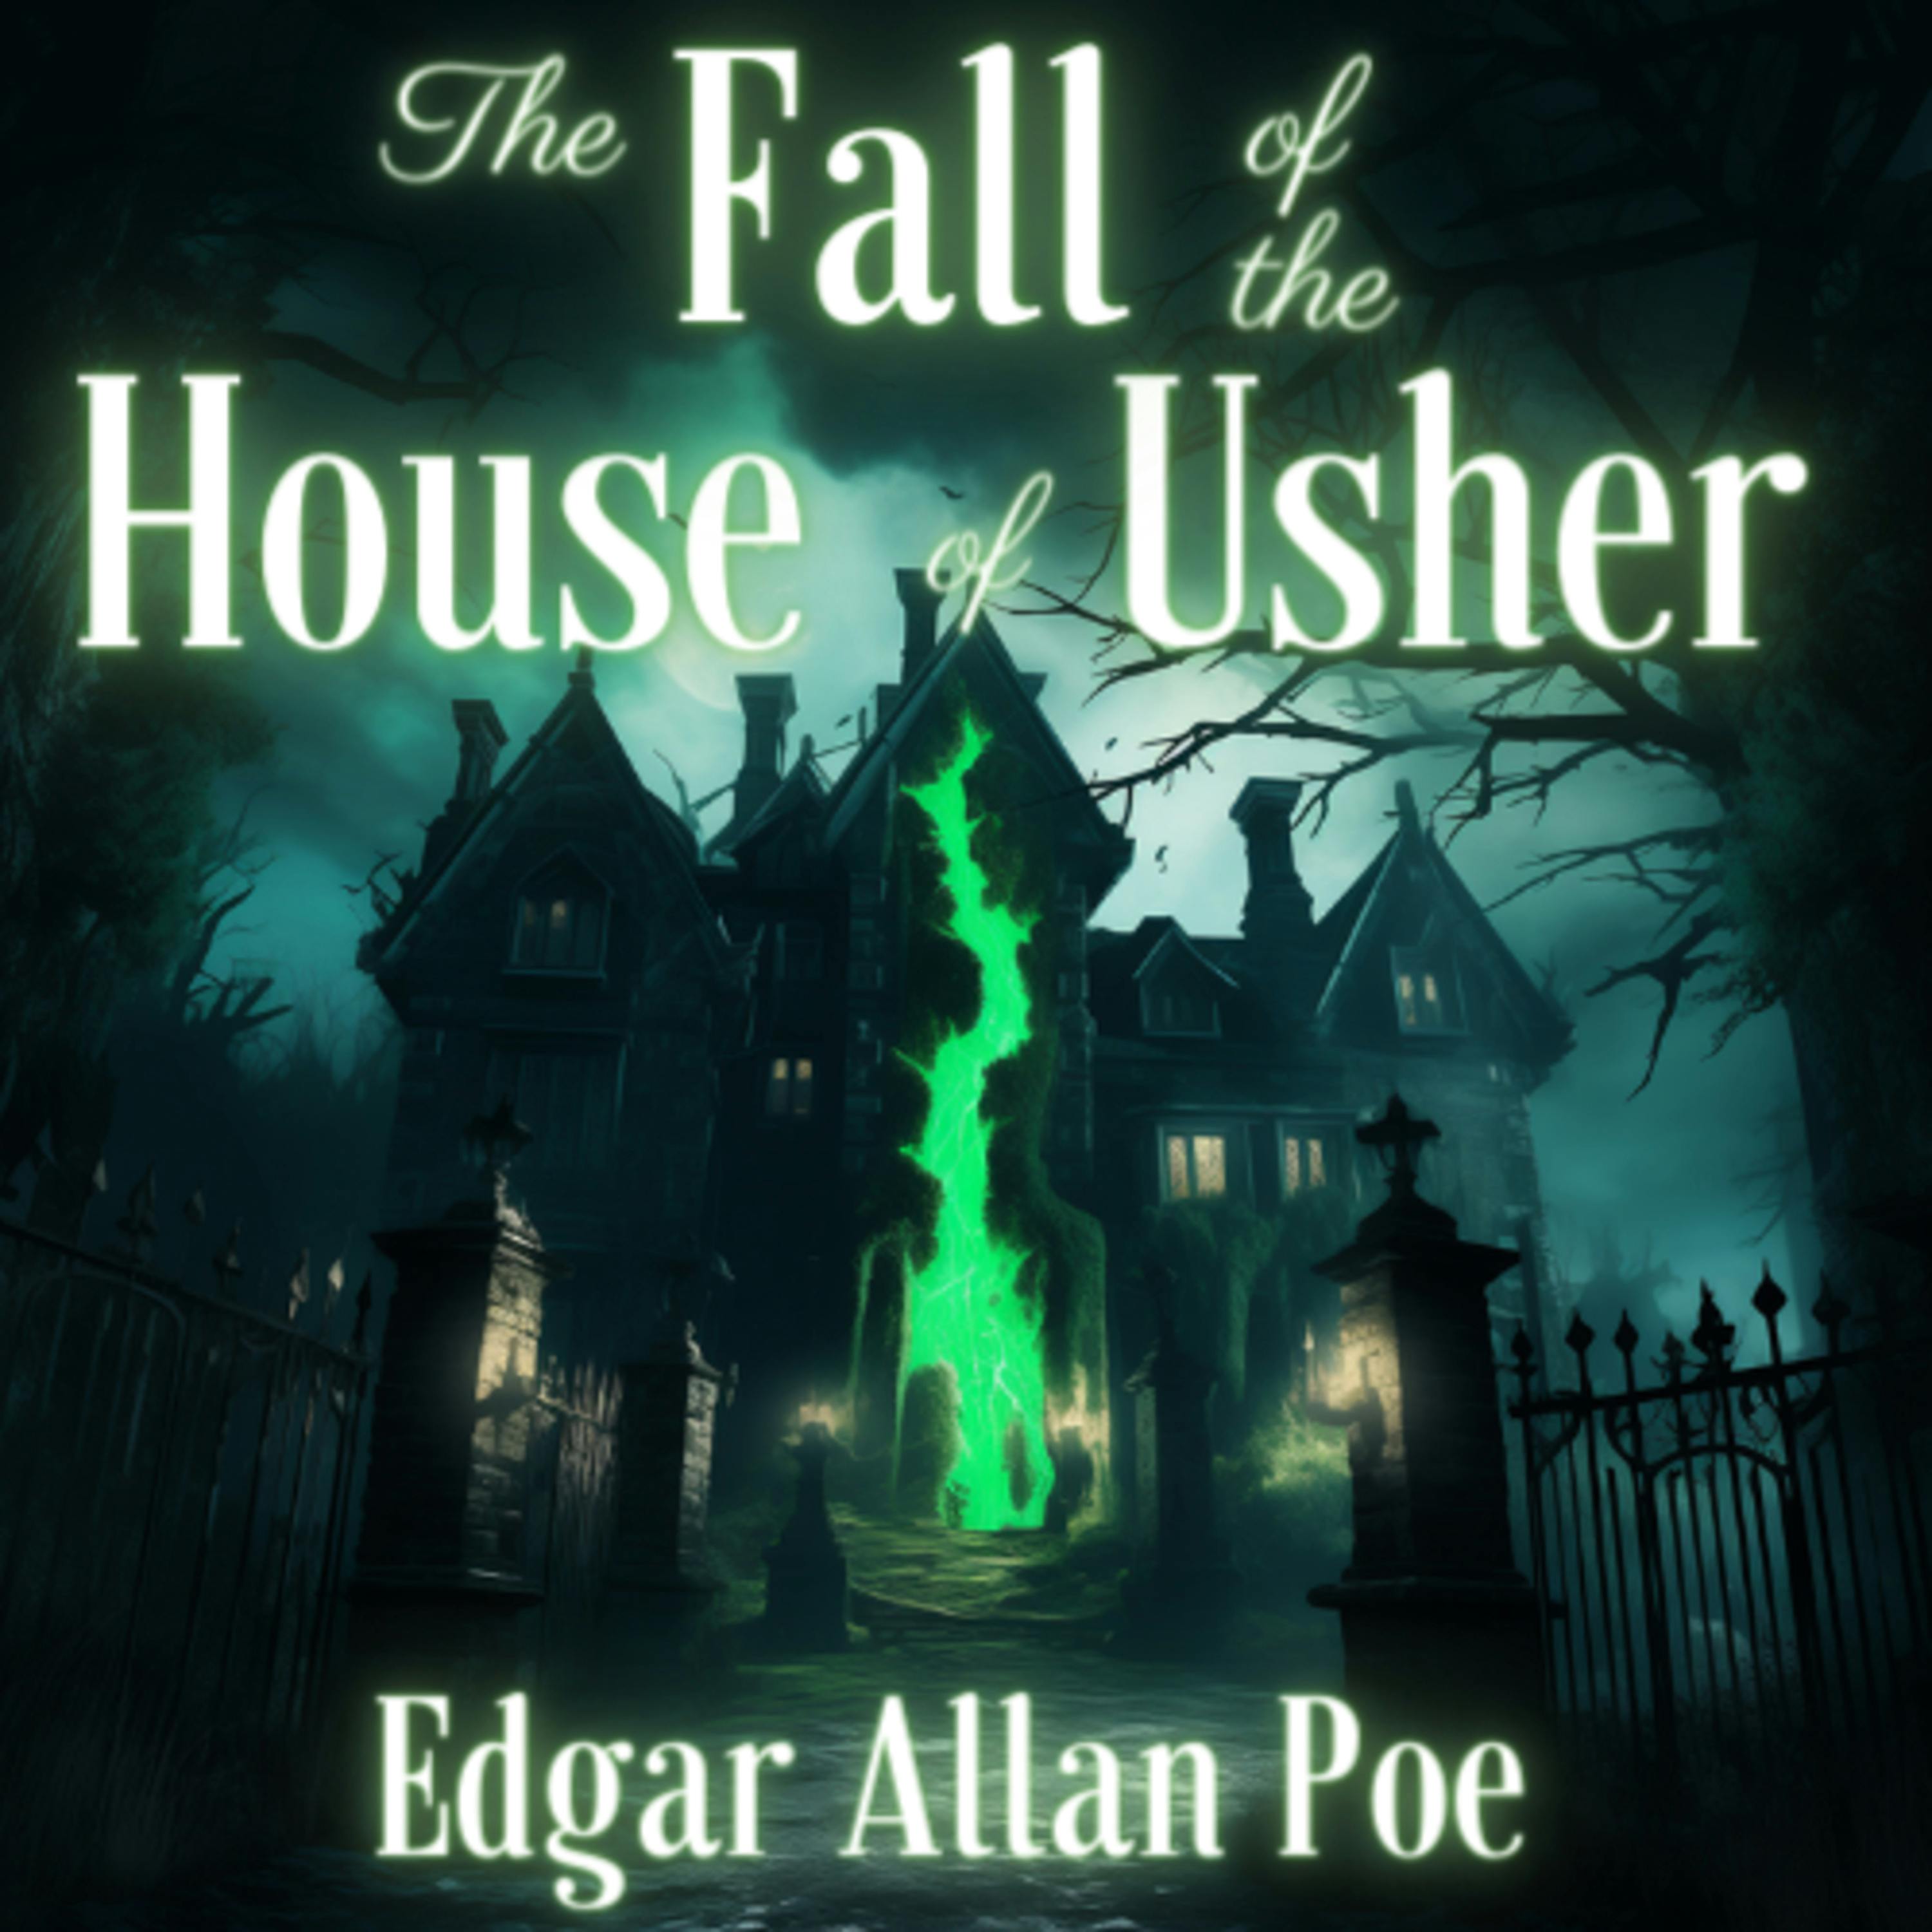 The Fall of the House of User by Edgar Allan Poe (Halloween Special)